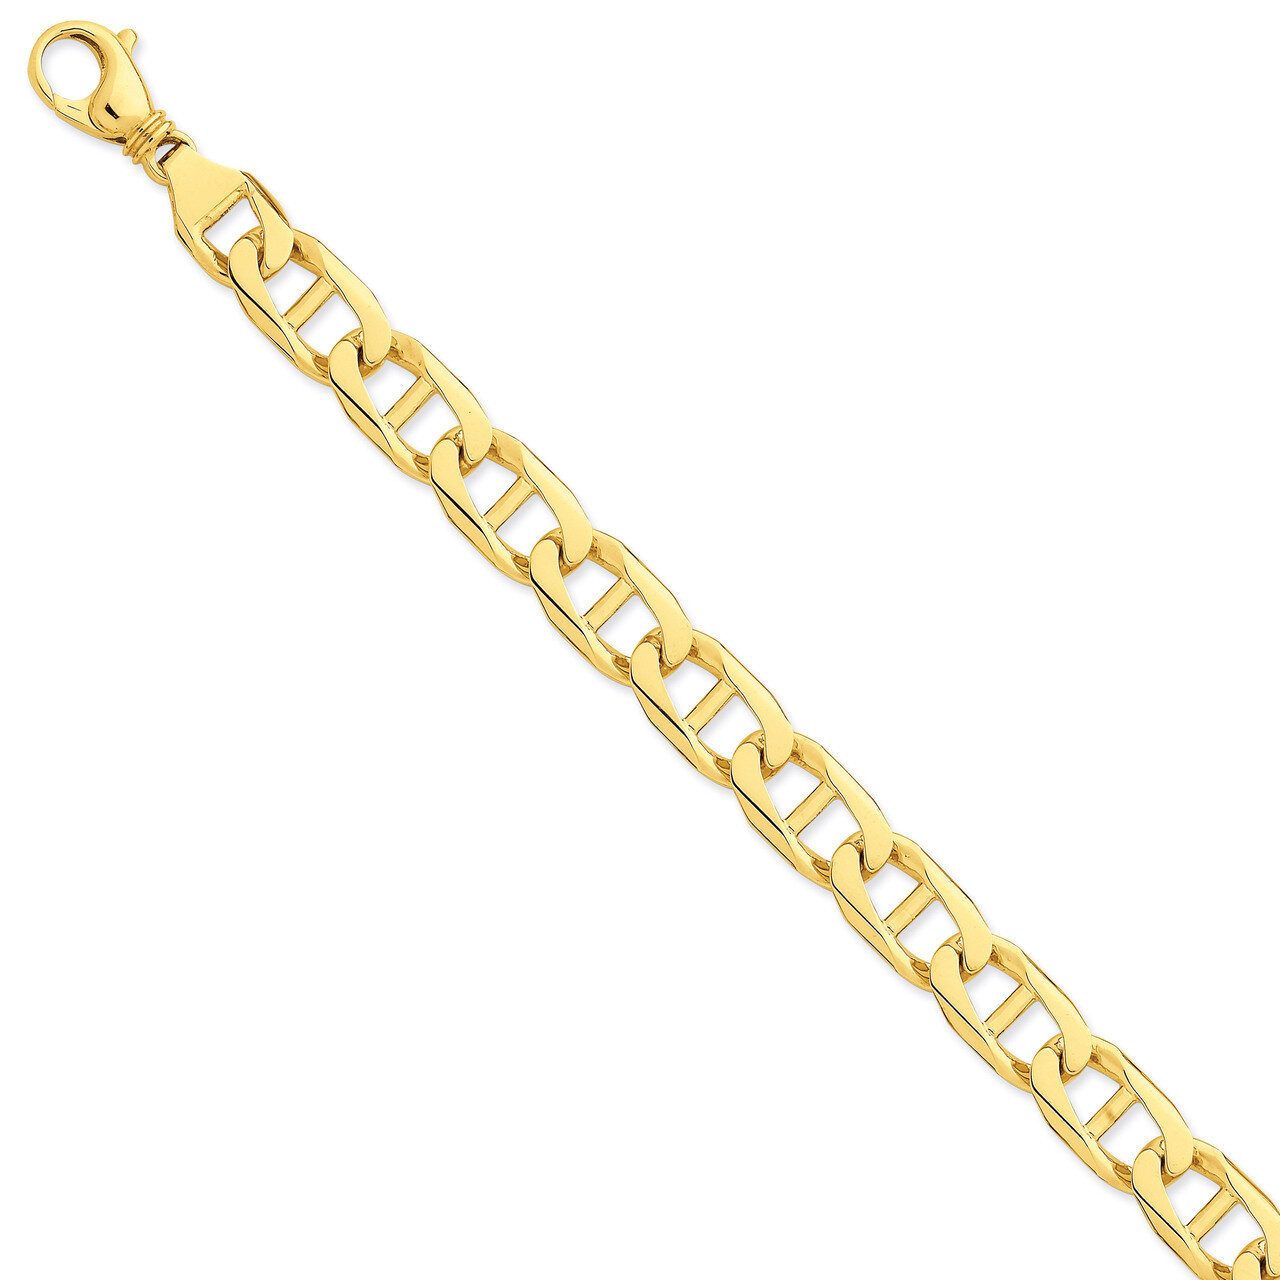 11mm Hand-Polished Anchor Link Chain 24 Inch 14k Gold LK102-24